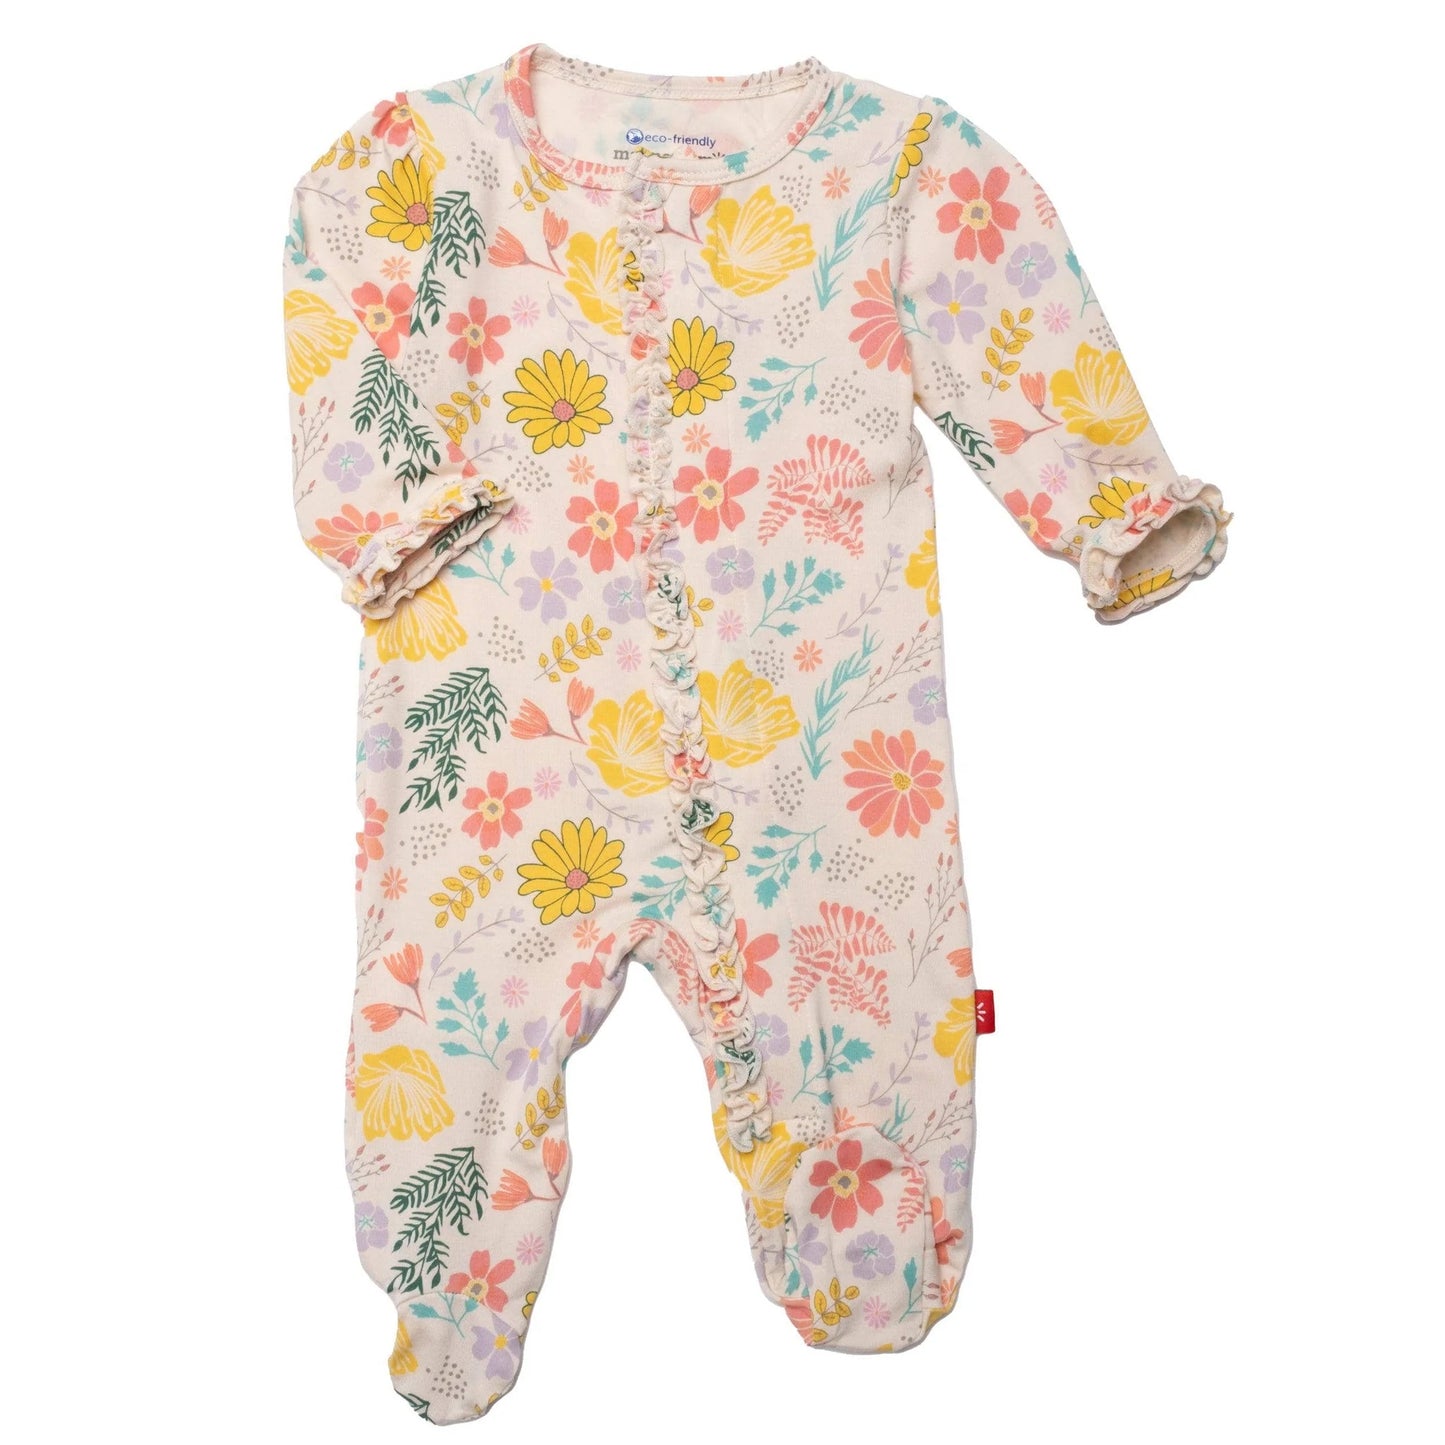 A baby's Primrose Cottage Modal Magnetic Ruched Ruffle Footie from Magnetic Me! with flowers on it.